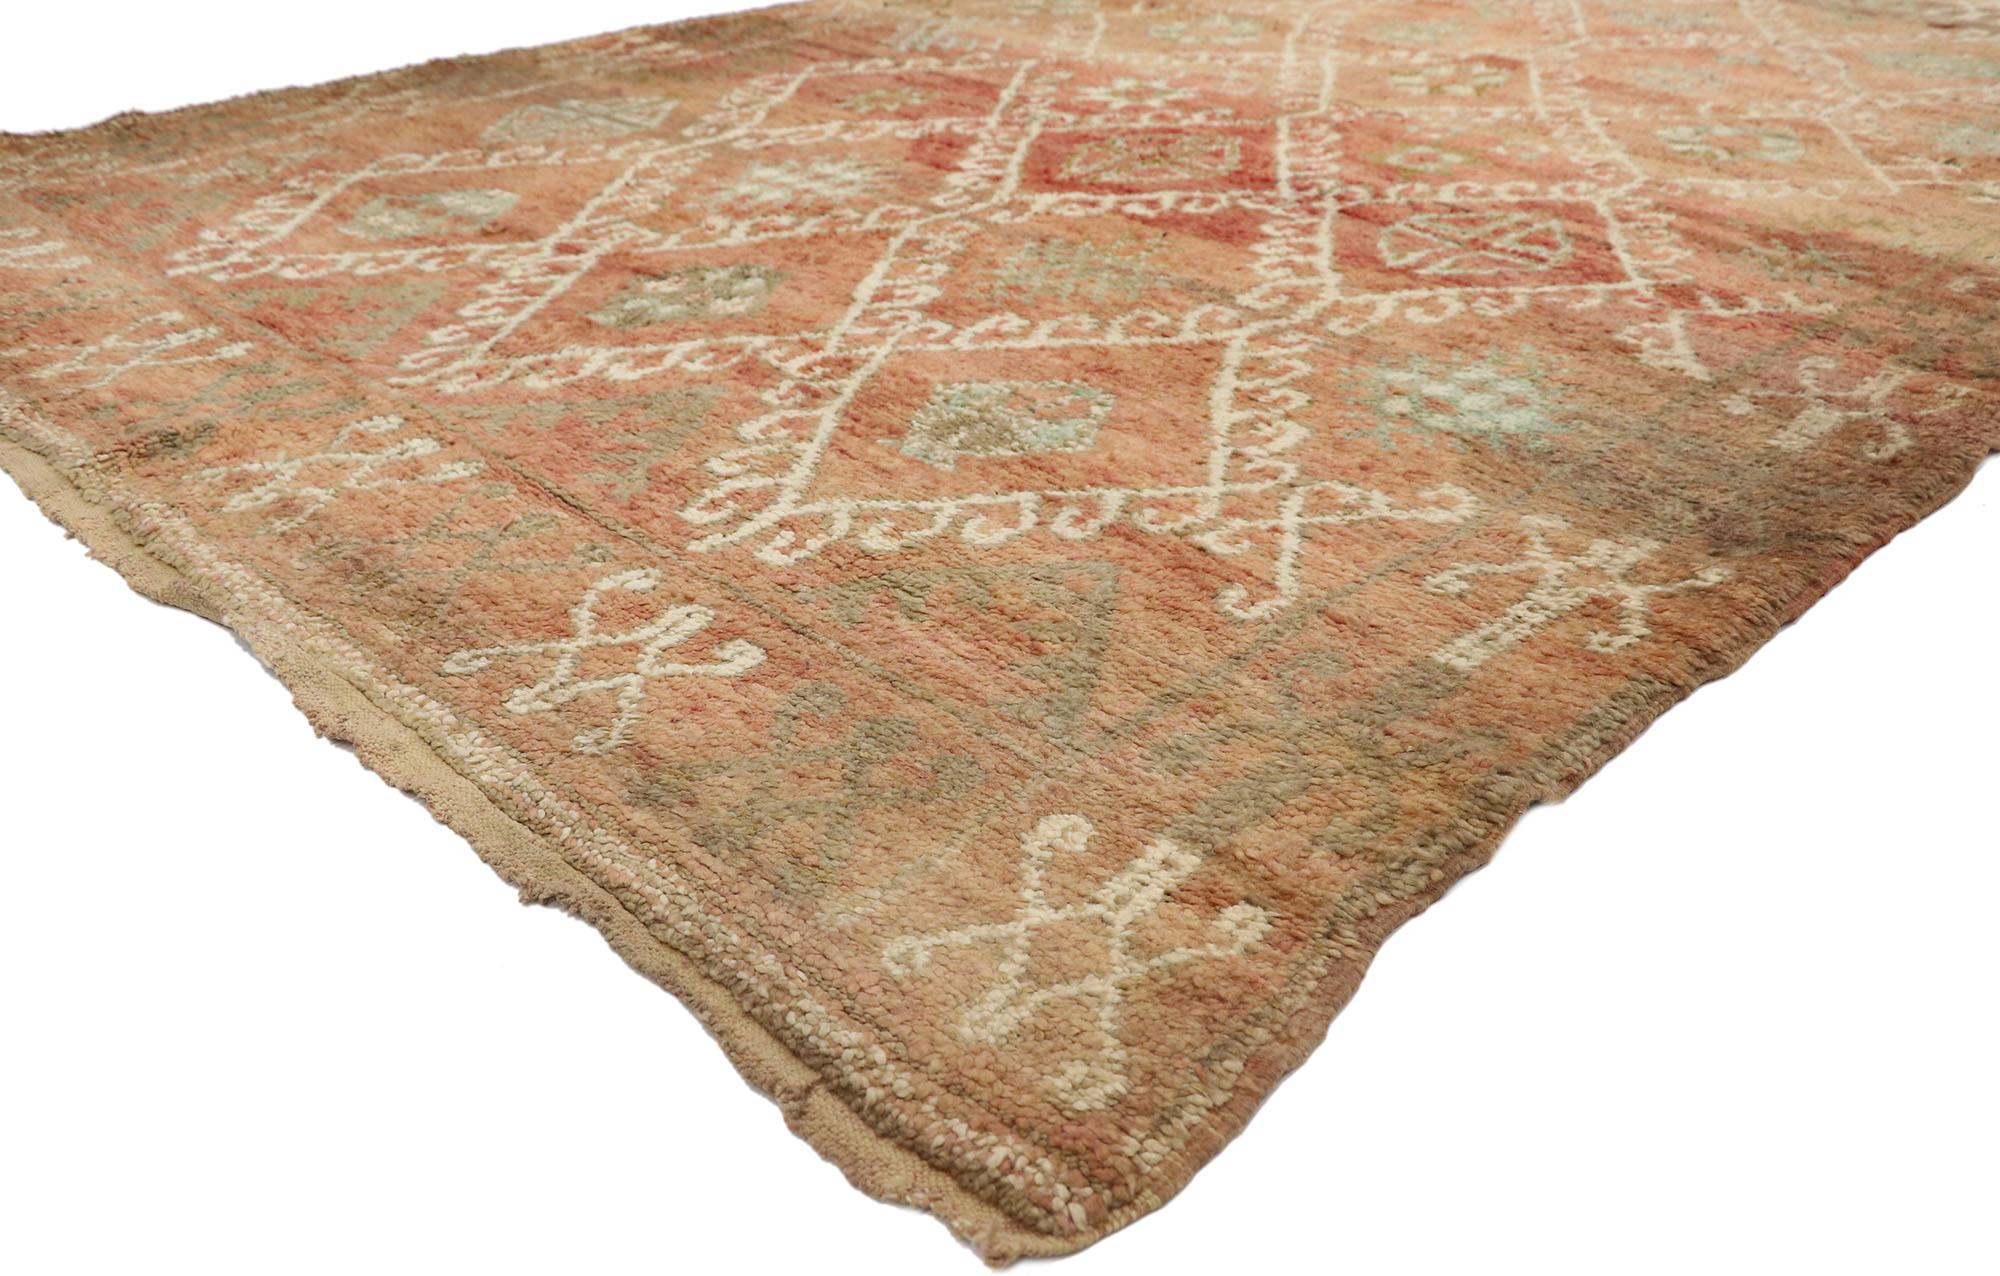 21246 Vintage Berber Moroccan Rug, 06'03 x 09'03.
Emanating rustic sensibility and rugged beauty with a lavish pile, this hand-knotted wool vintage Moroccan rug creates an inimitable warmth and calming ambiance. The detailed diamond design and